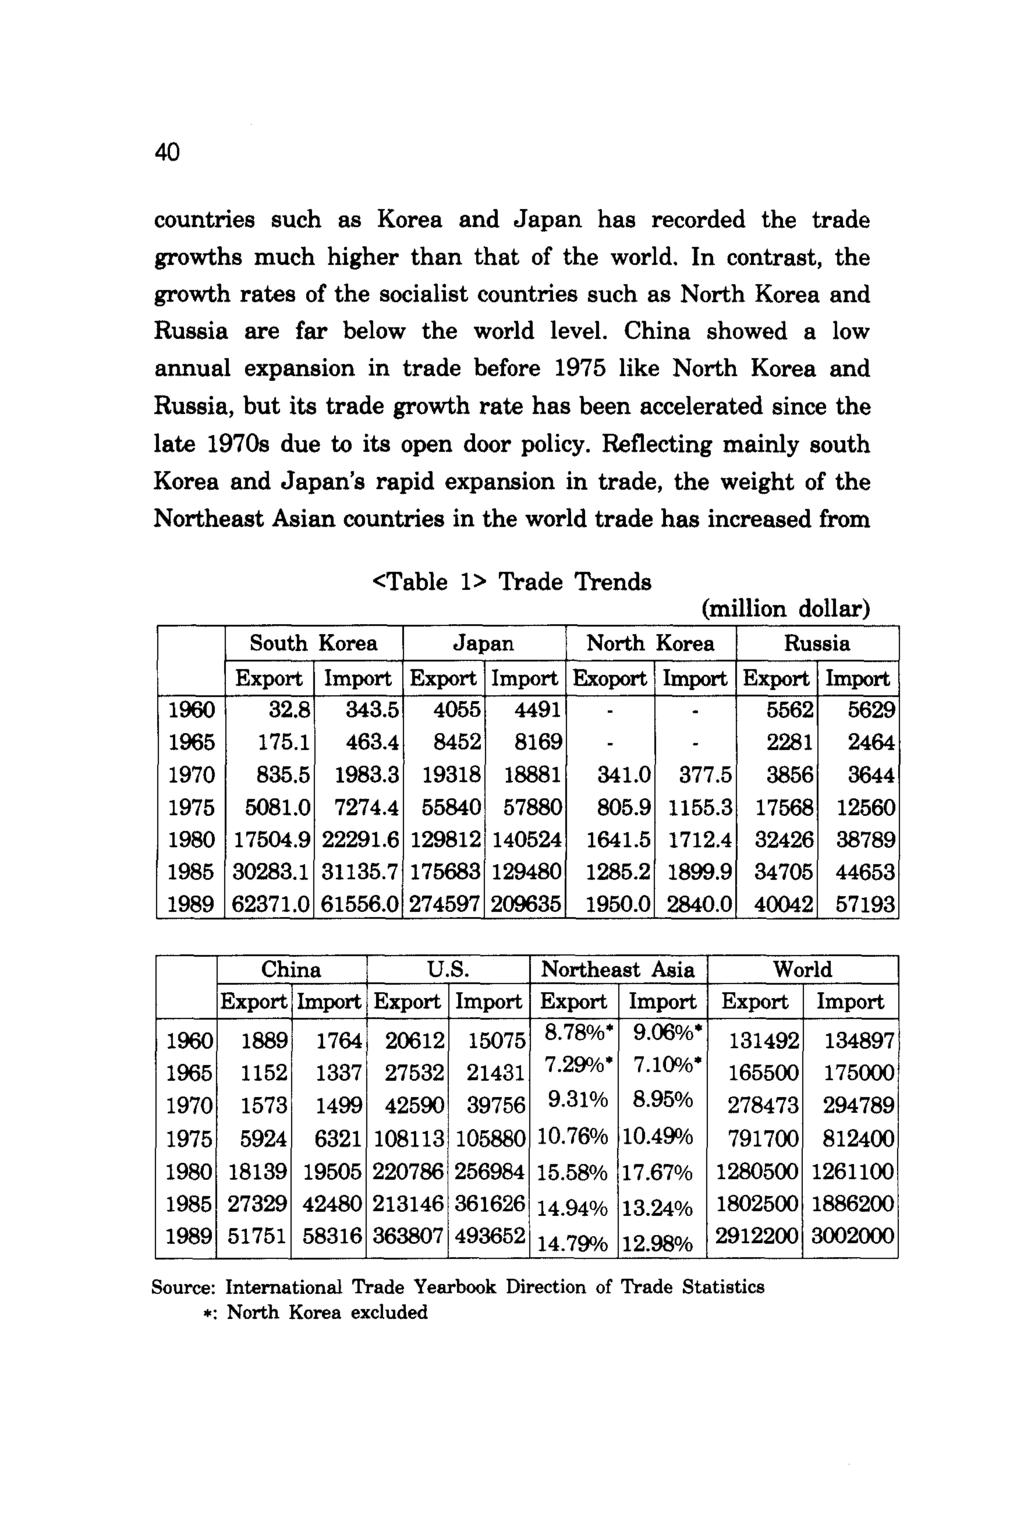 40 countries such as Korea and Japan has recorded the trade growths much higher than that of the world.